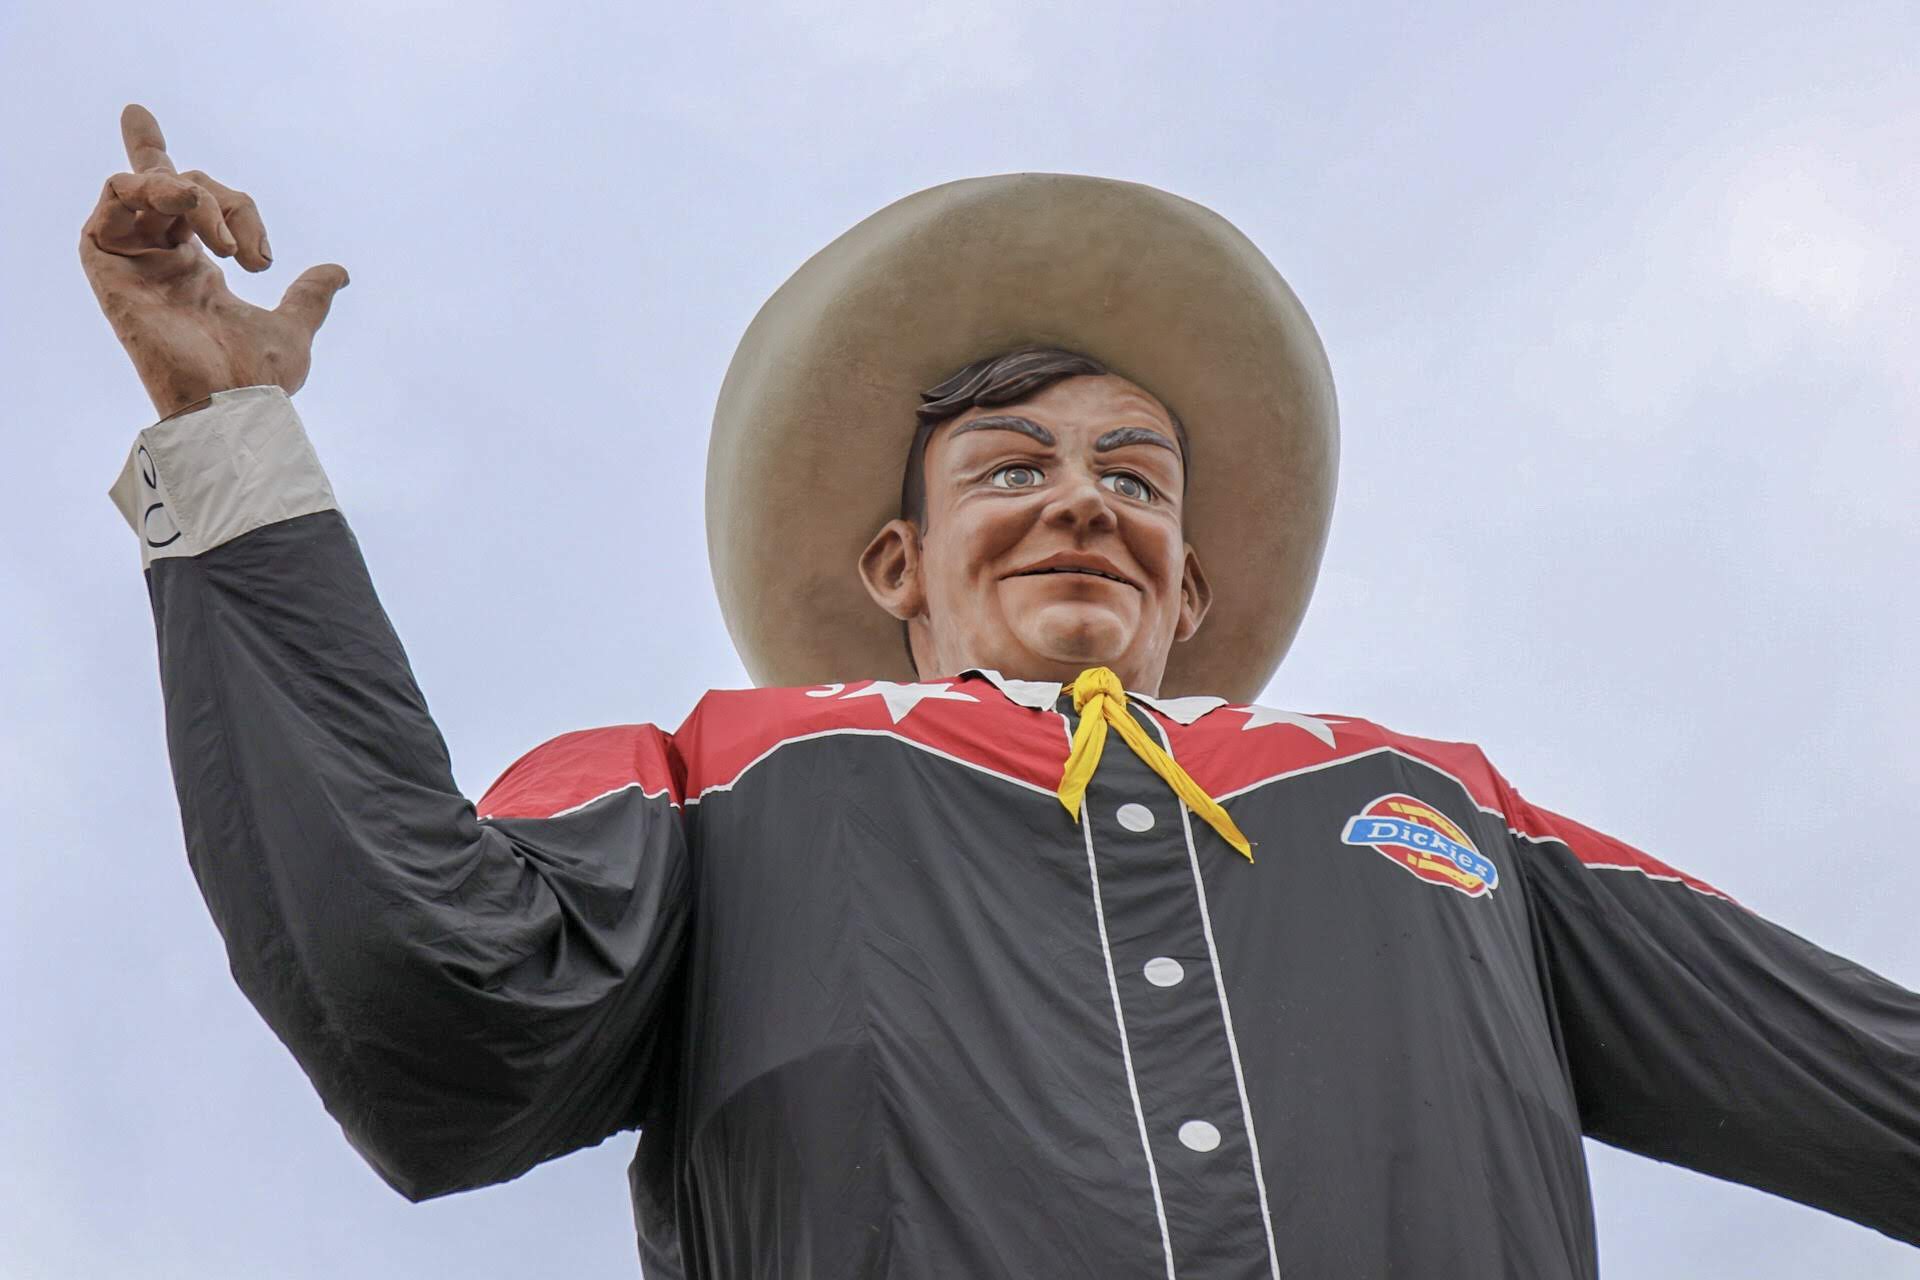 Things to know about Big Tex, the tallest Texan at the State Fair of Texas - Houston ...